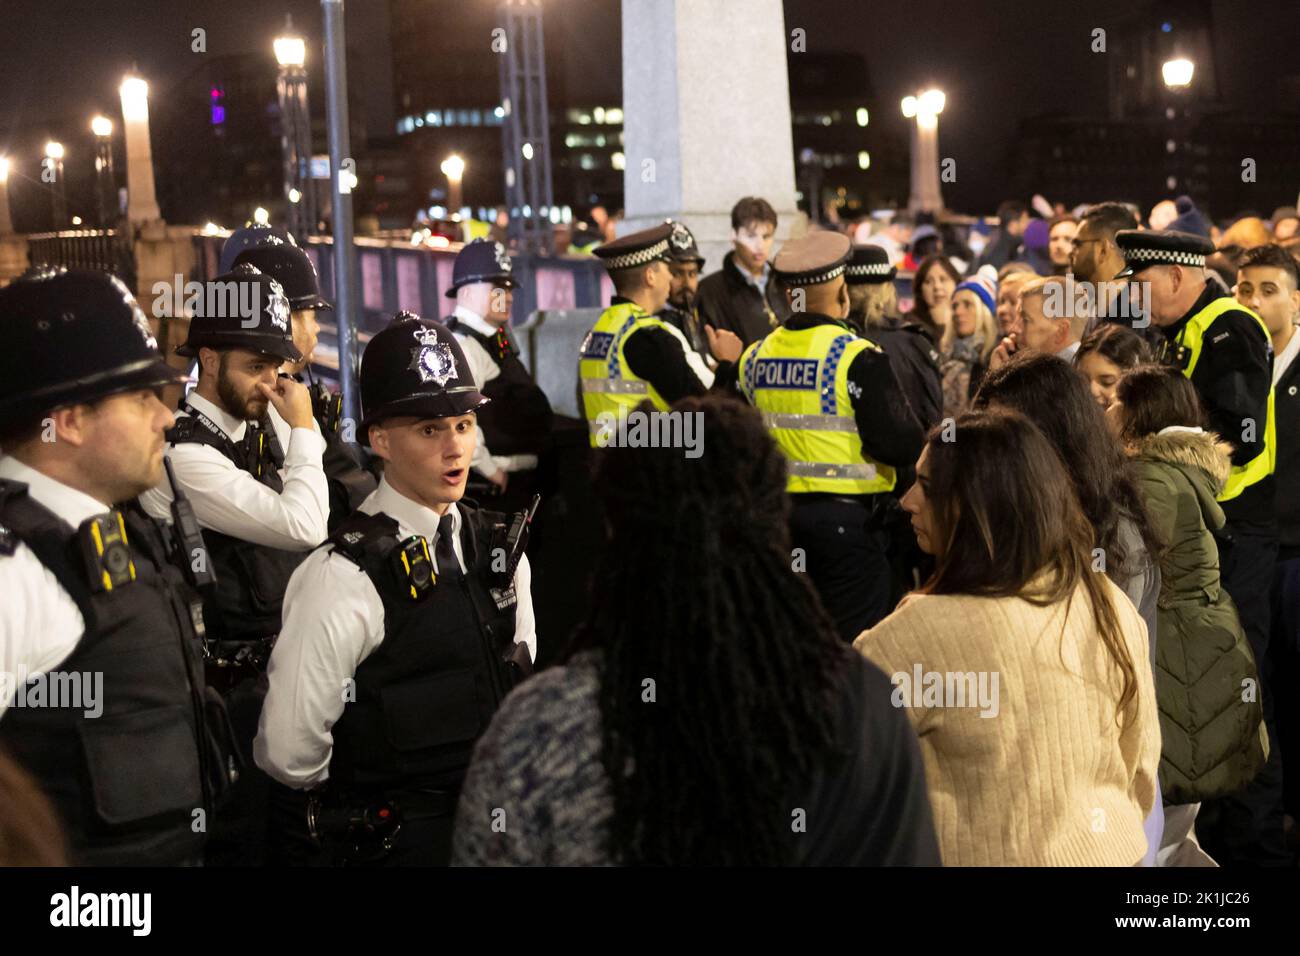 People argue with police officers after the door to pay respect to Britain's Queen Elizabeth was closed, following her death, outside of the Houses of Parliament in London, Britain September 18, 2022. REUTERS/Carlos Barria Stock Photo